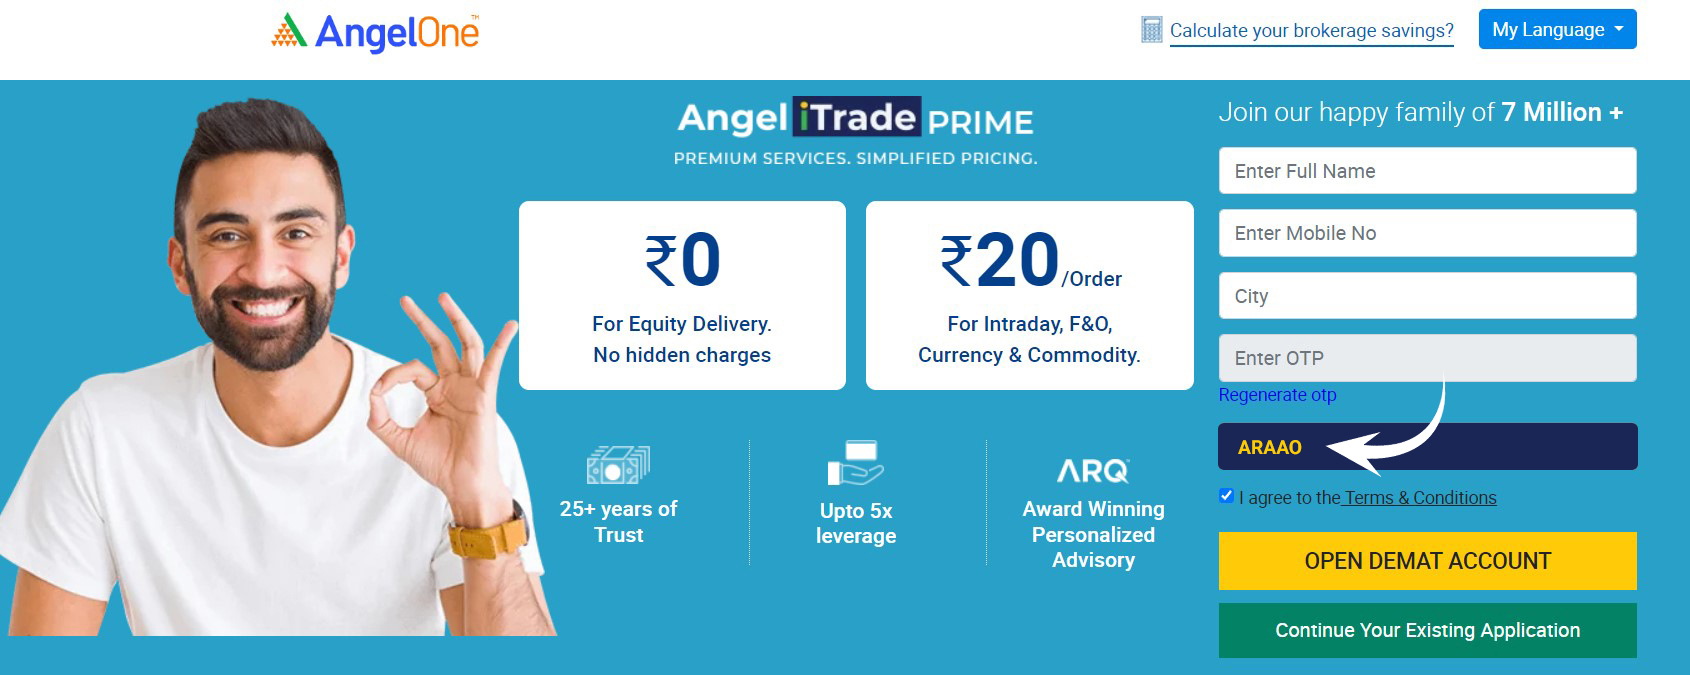 Use GoPaisa Angel Broking referral code “ARAAO” or download GoPaisa app to get lucrative offers on signup.